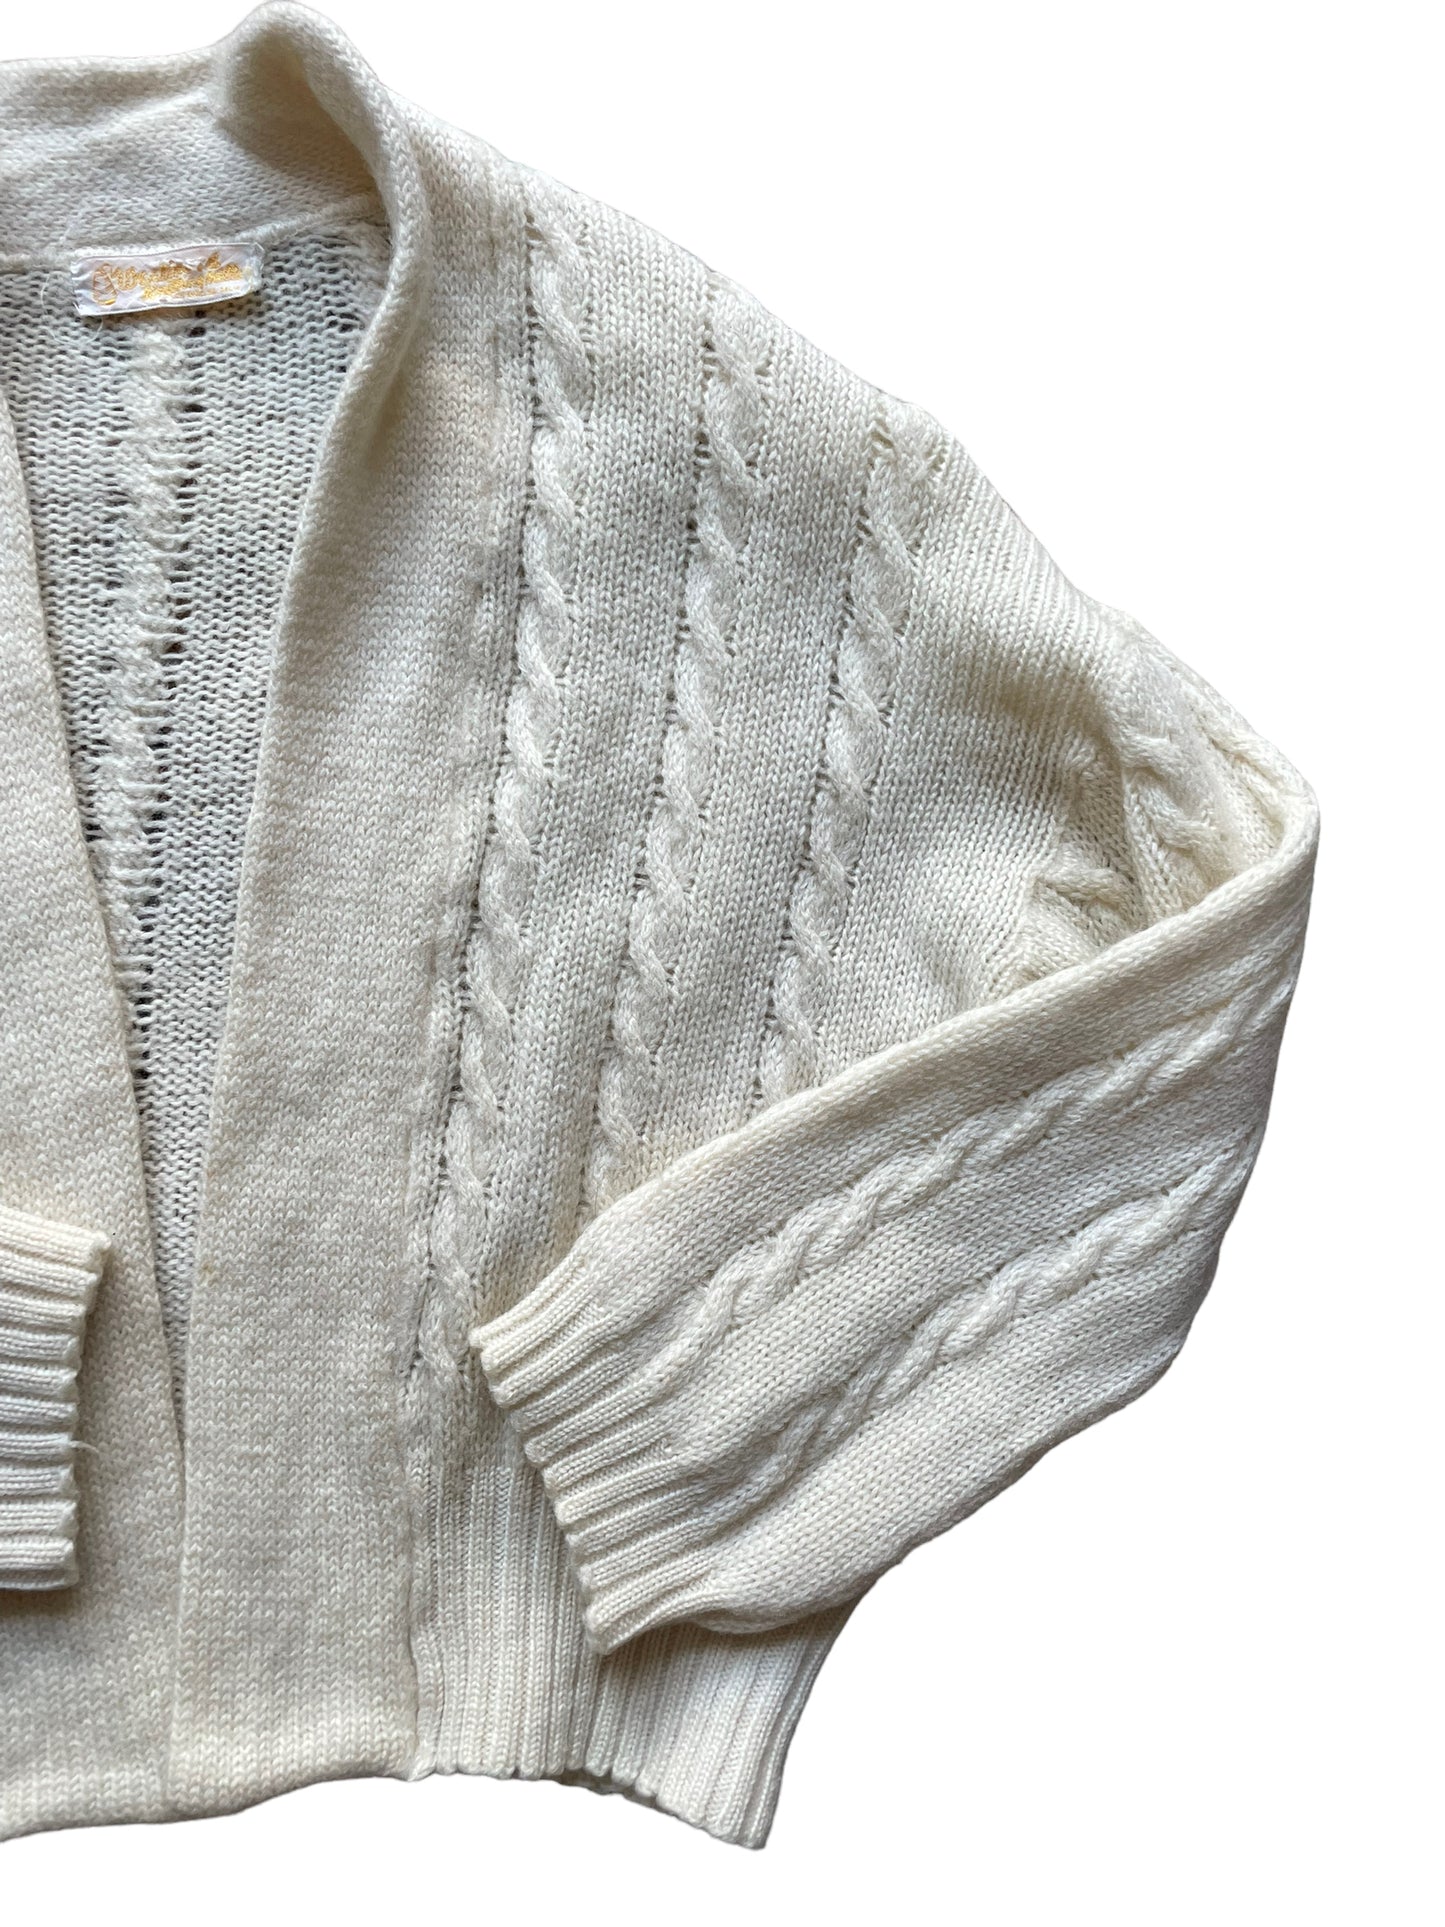 Front left side flat lay of Vintage 1950s Cable Knit Cardigan Sweater | Barn Owl Seattle | Seattle True Vintage